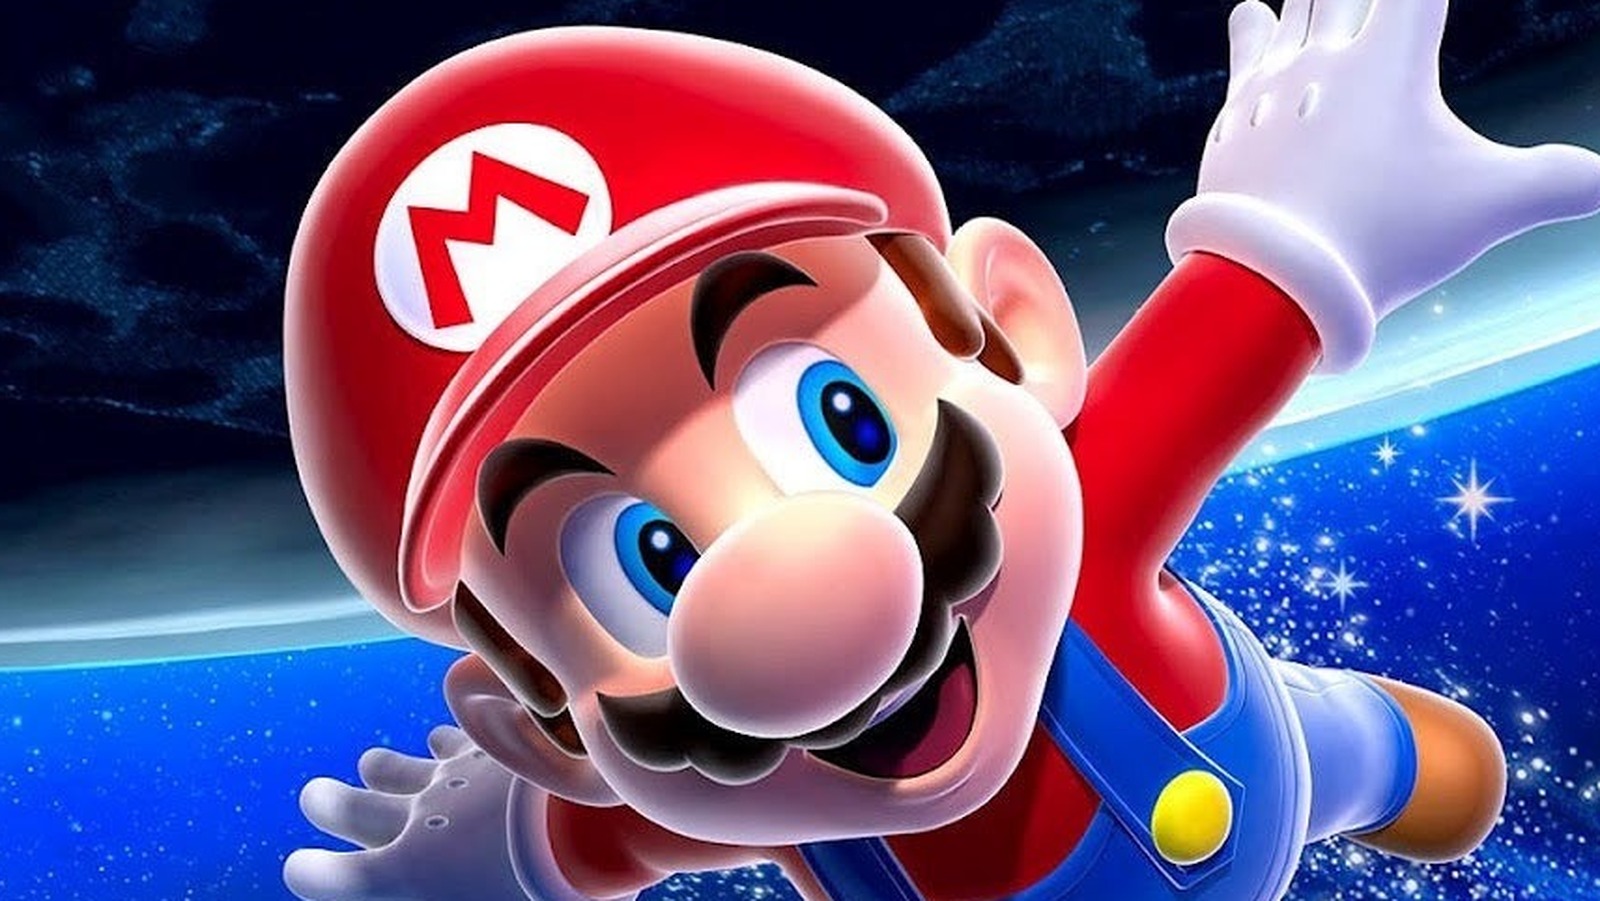 mario games for free on the wide world